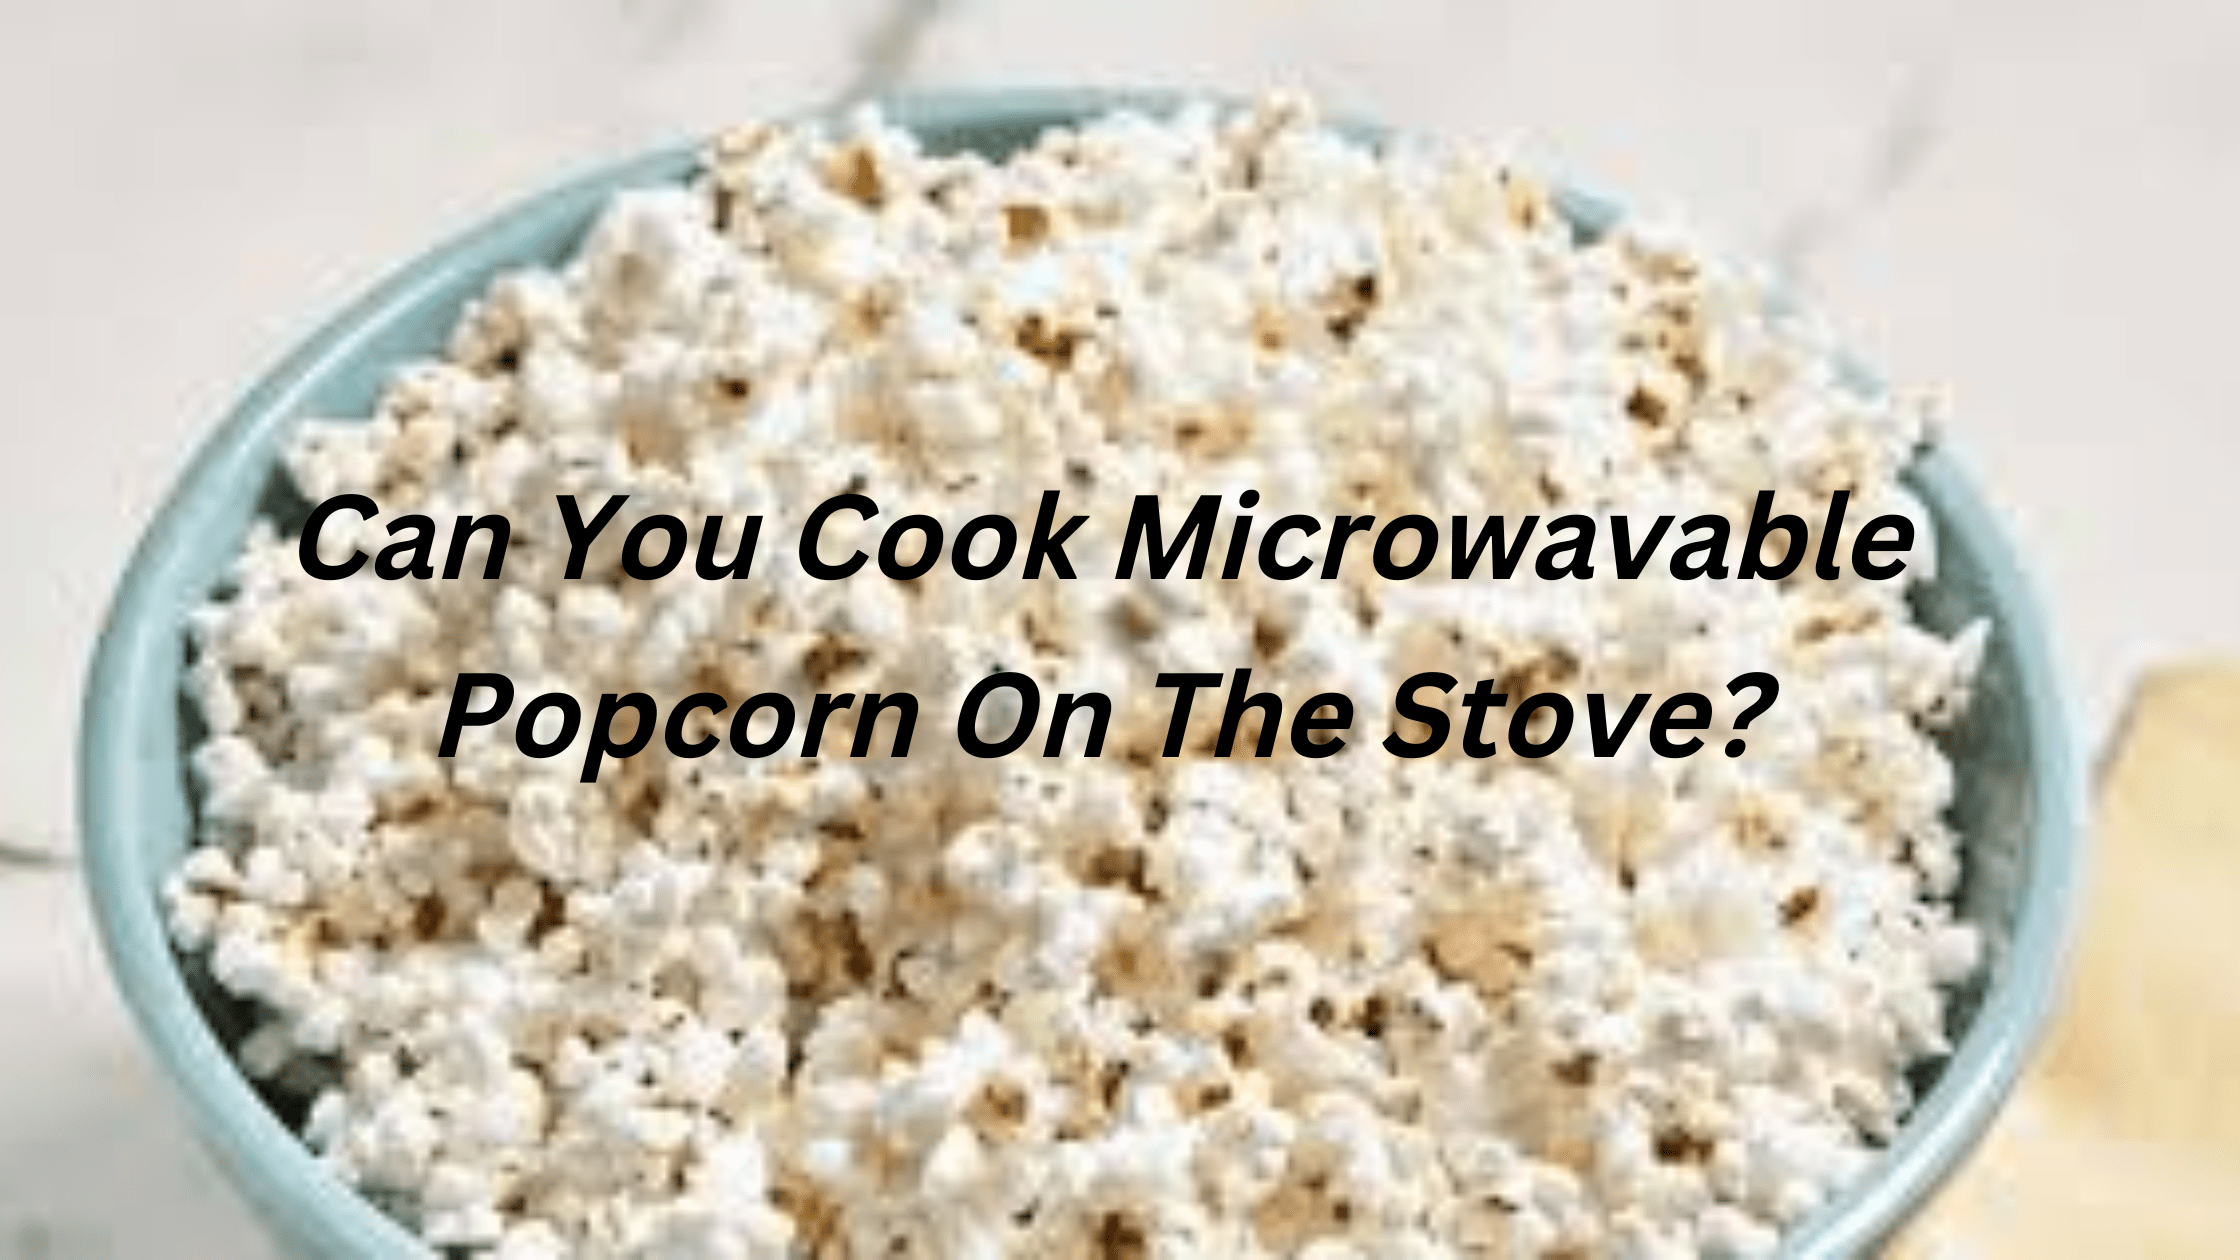 Can You Cook Microwavable Popcorn On The Stove?